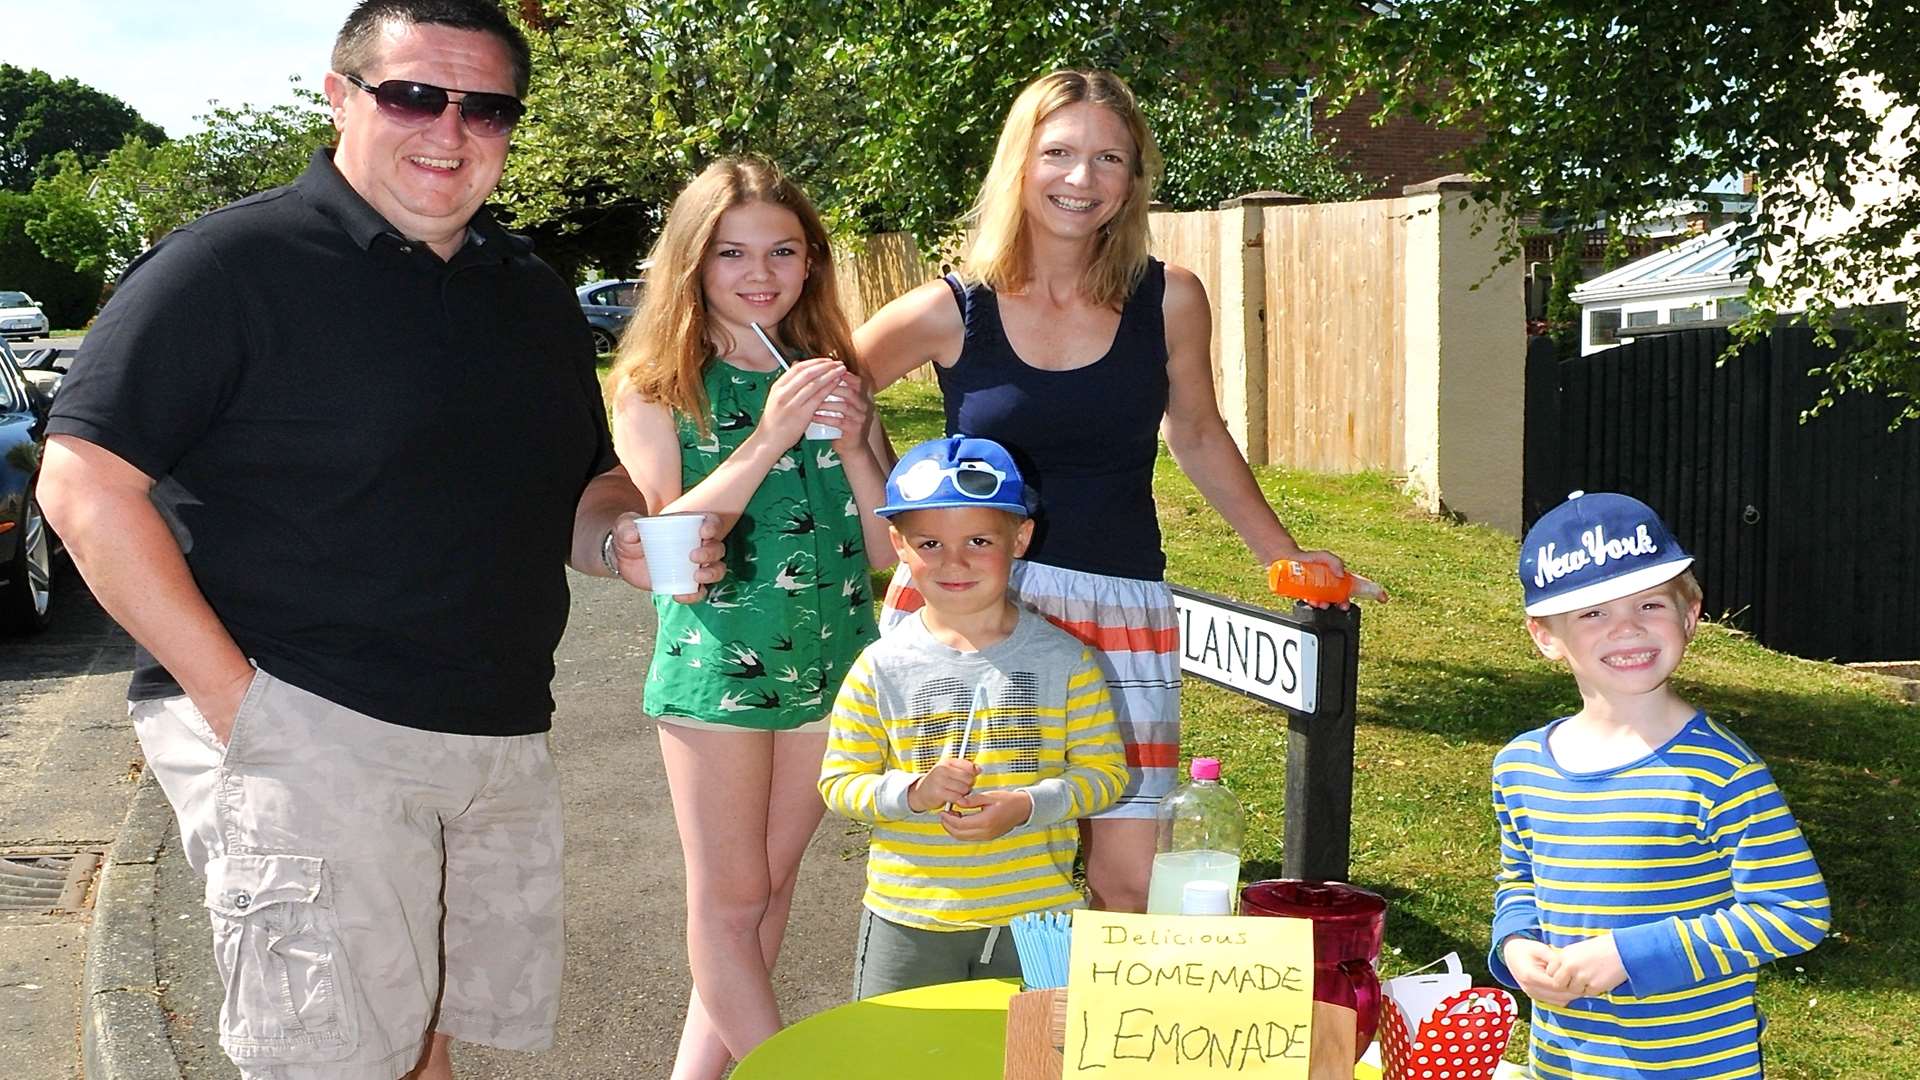 Local residents and people passing through stopped to buy a refreshing glass of lemonade from Issac and Ethan Taspell